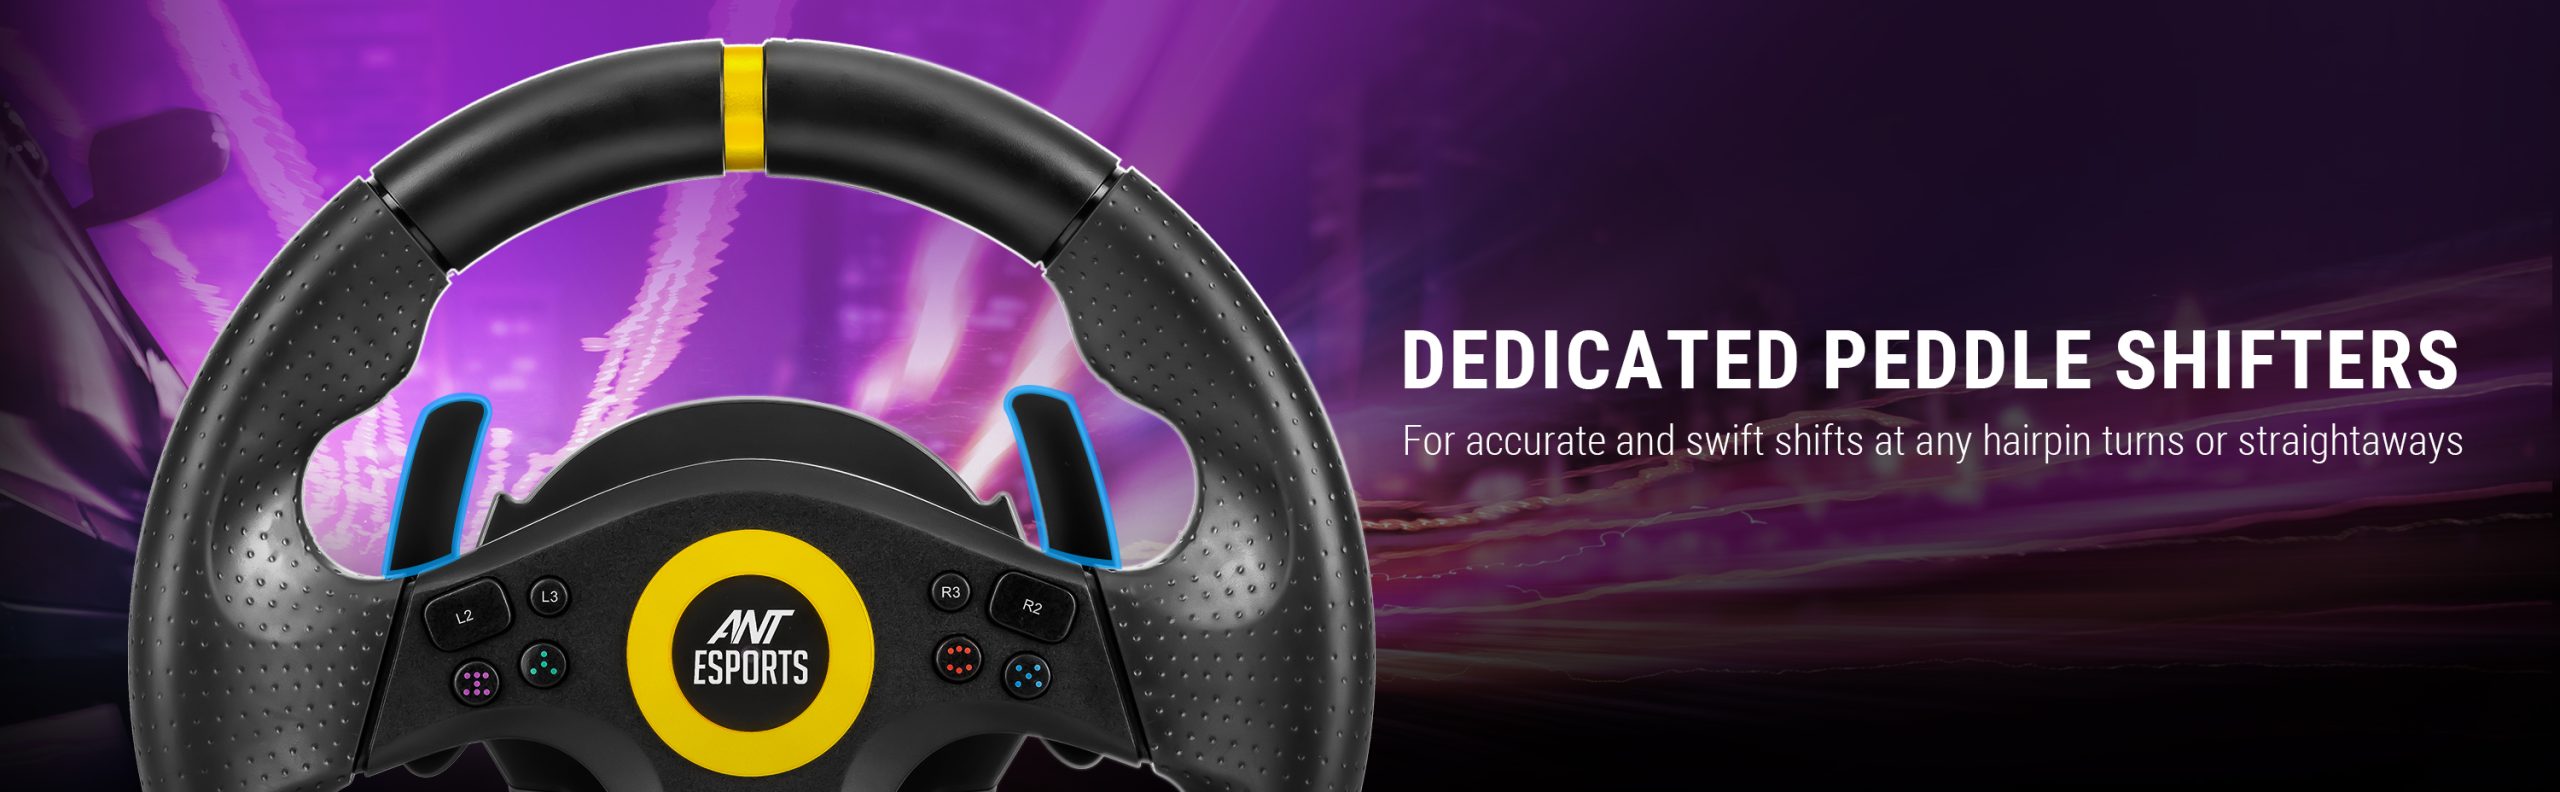 R3 Racing Wheel and Pedals